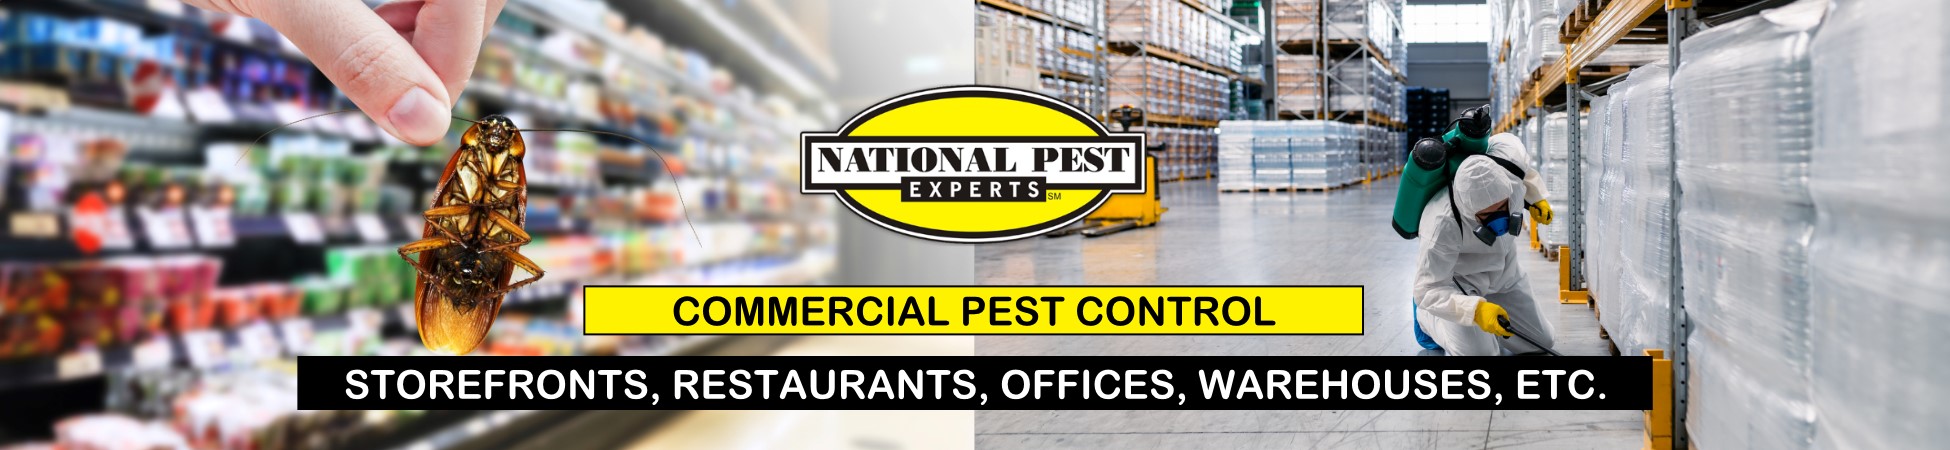 National Pest Experts - Commercial & Industrial exterminating and pest control in Bethpage, NY